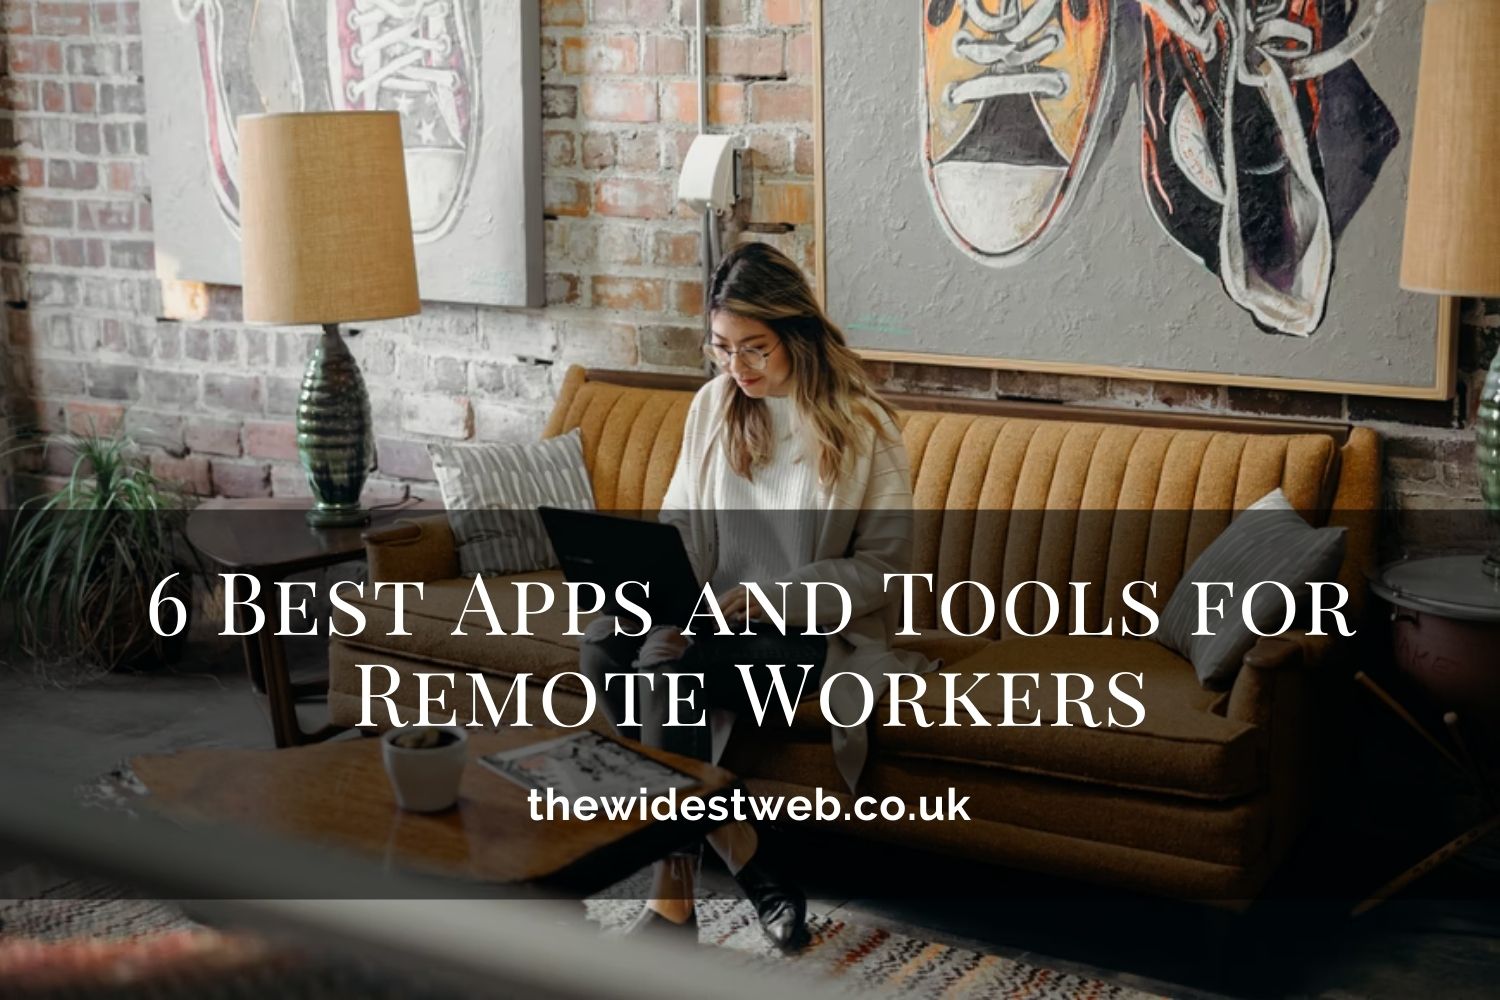 The 6 Best Apps & Tools for Remote Workers’ improved Productivity & Efficiency